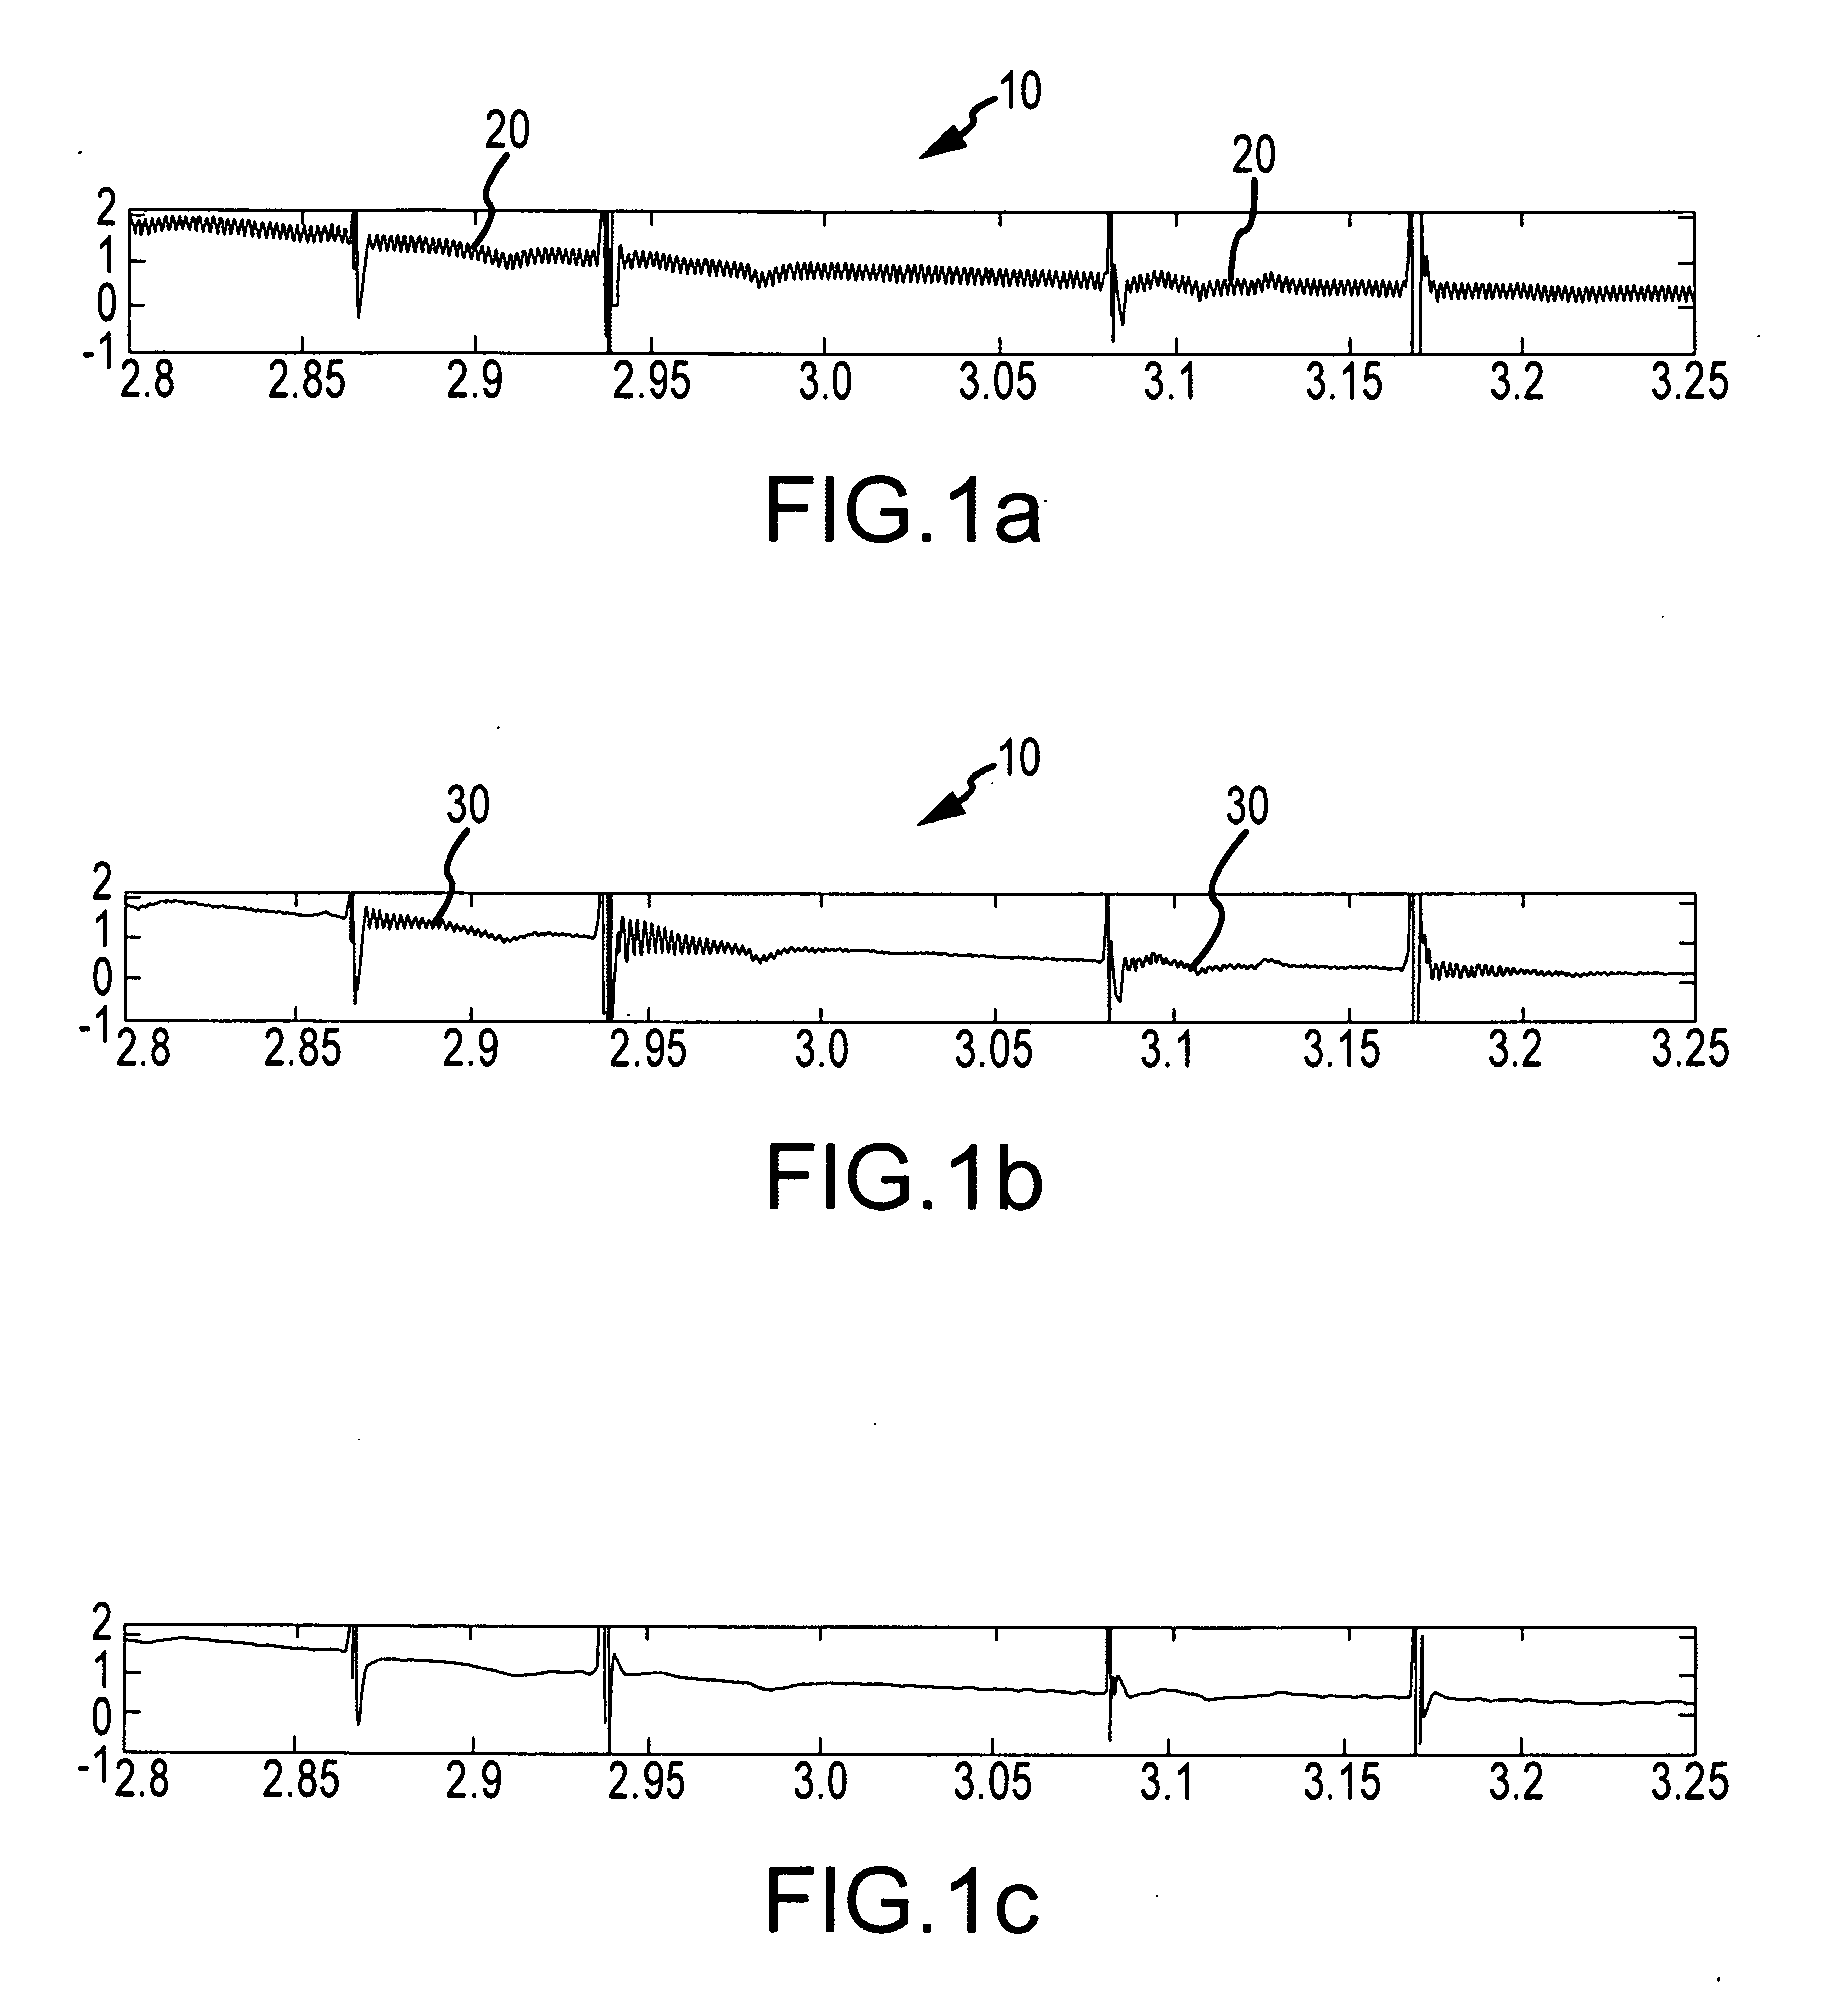 System and Method for Filtering Electrophysiological Signals